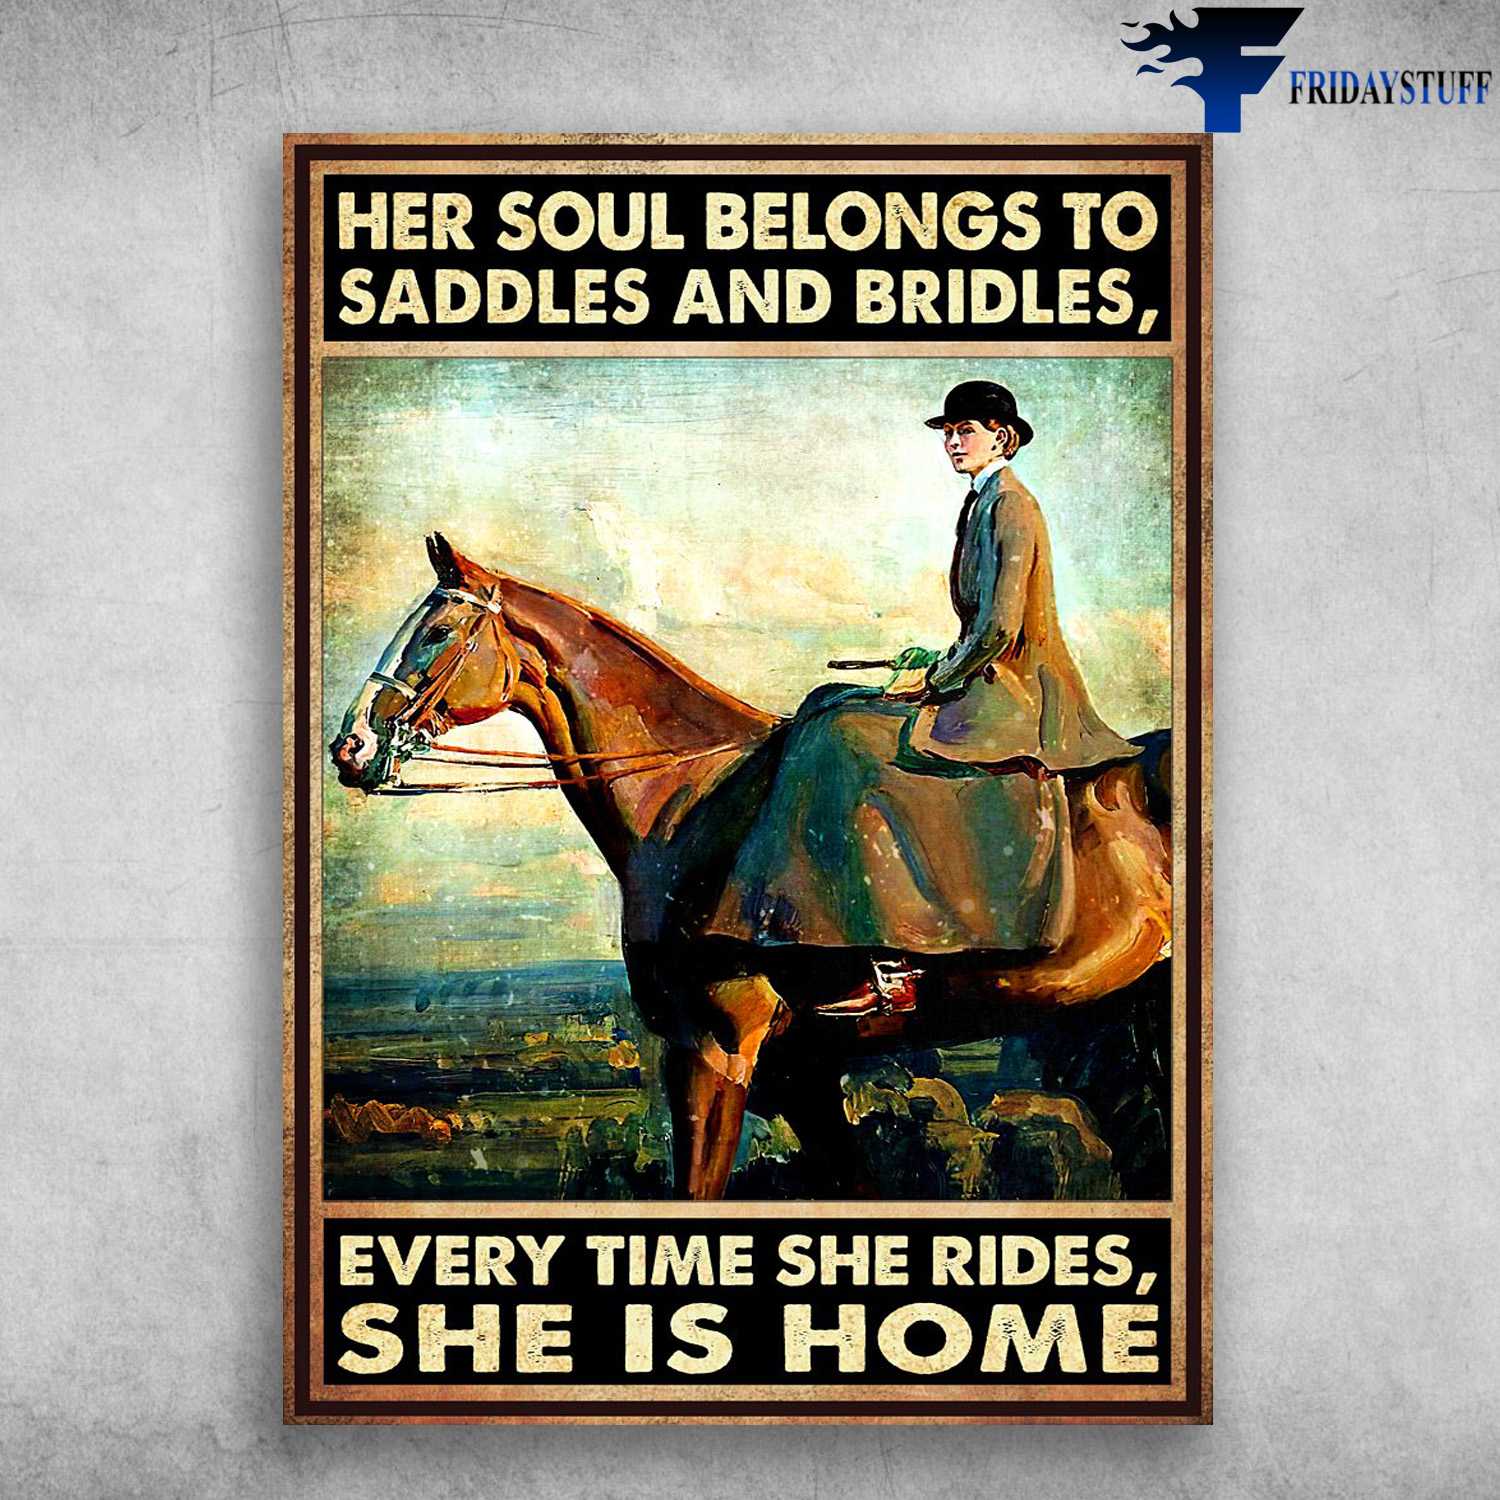 Lady Riding Horse - Her Soul Belongs To, Saddles And Bridles, Every Time She Rides, She Is Home